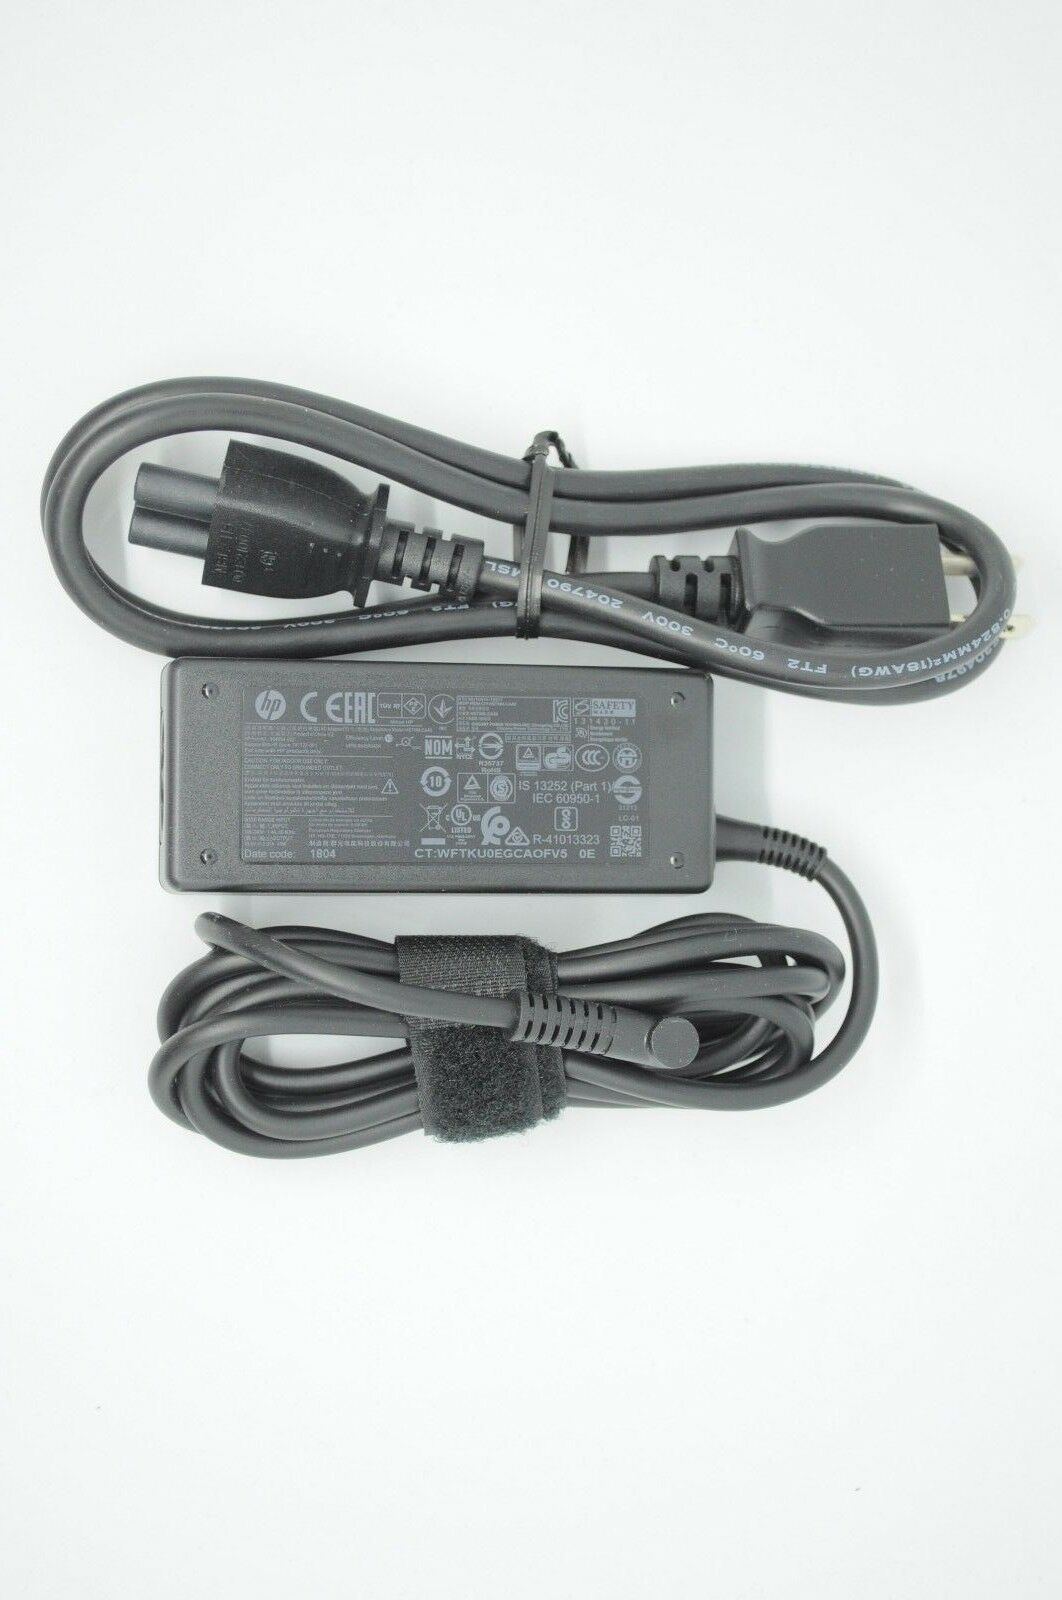 New Genuine OEM Charger AC Power Adapter for HP EliteBook 840-G4, 840-G3 Country/Region of Manufacture: China Compatib